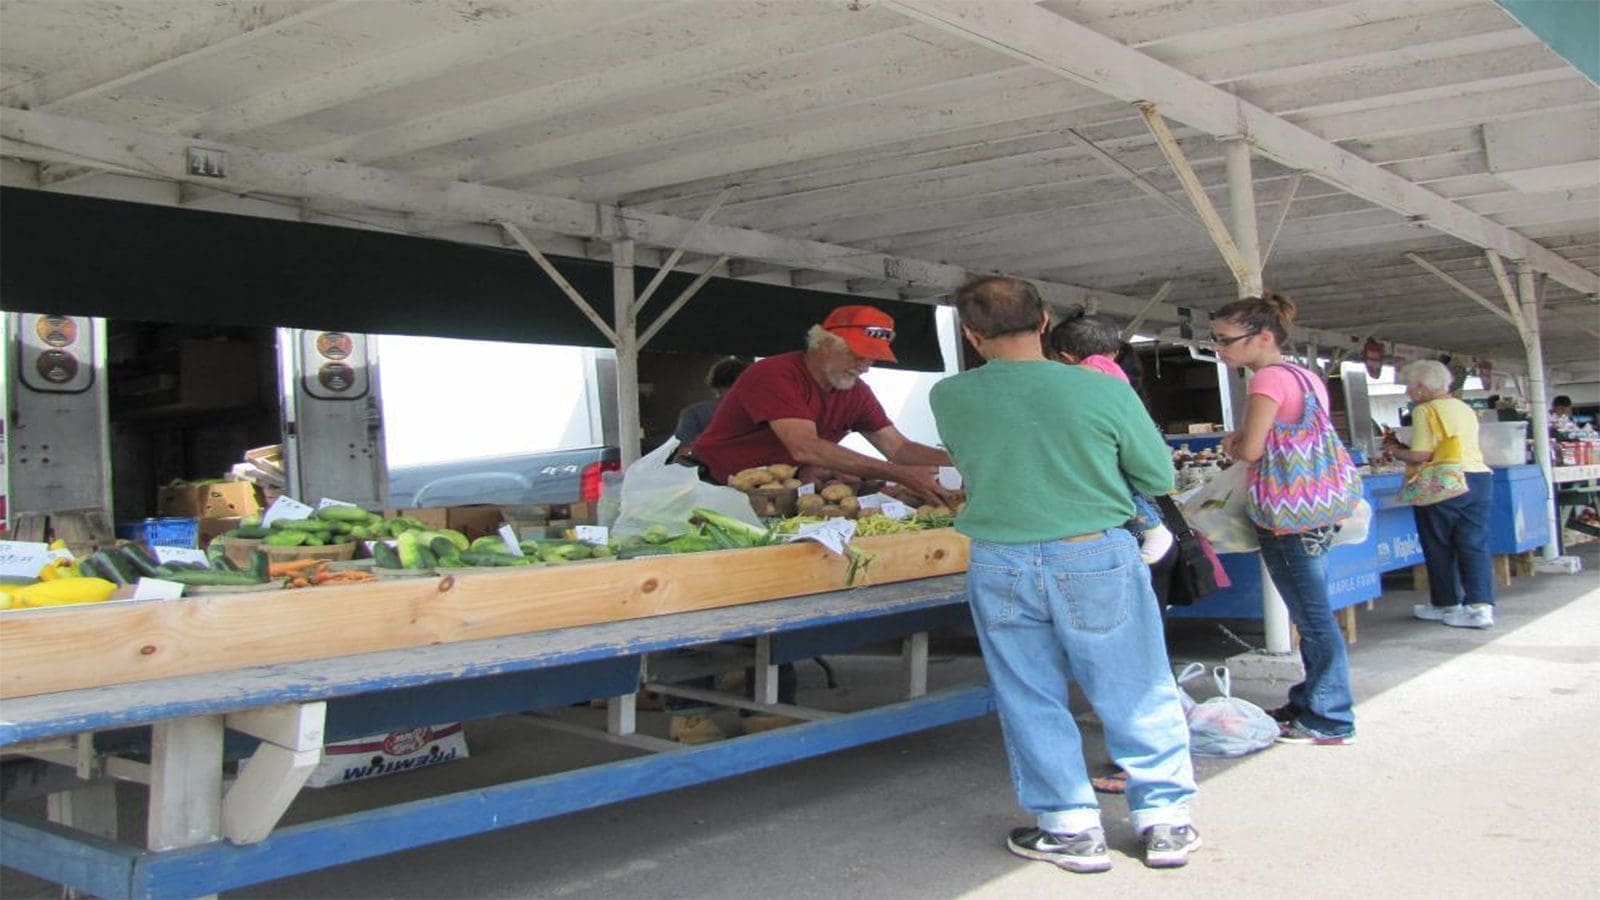 Penn State researchers design online food safety training for farmers’ market vendors